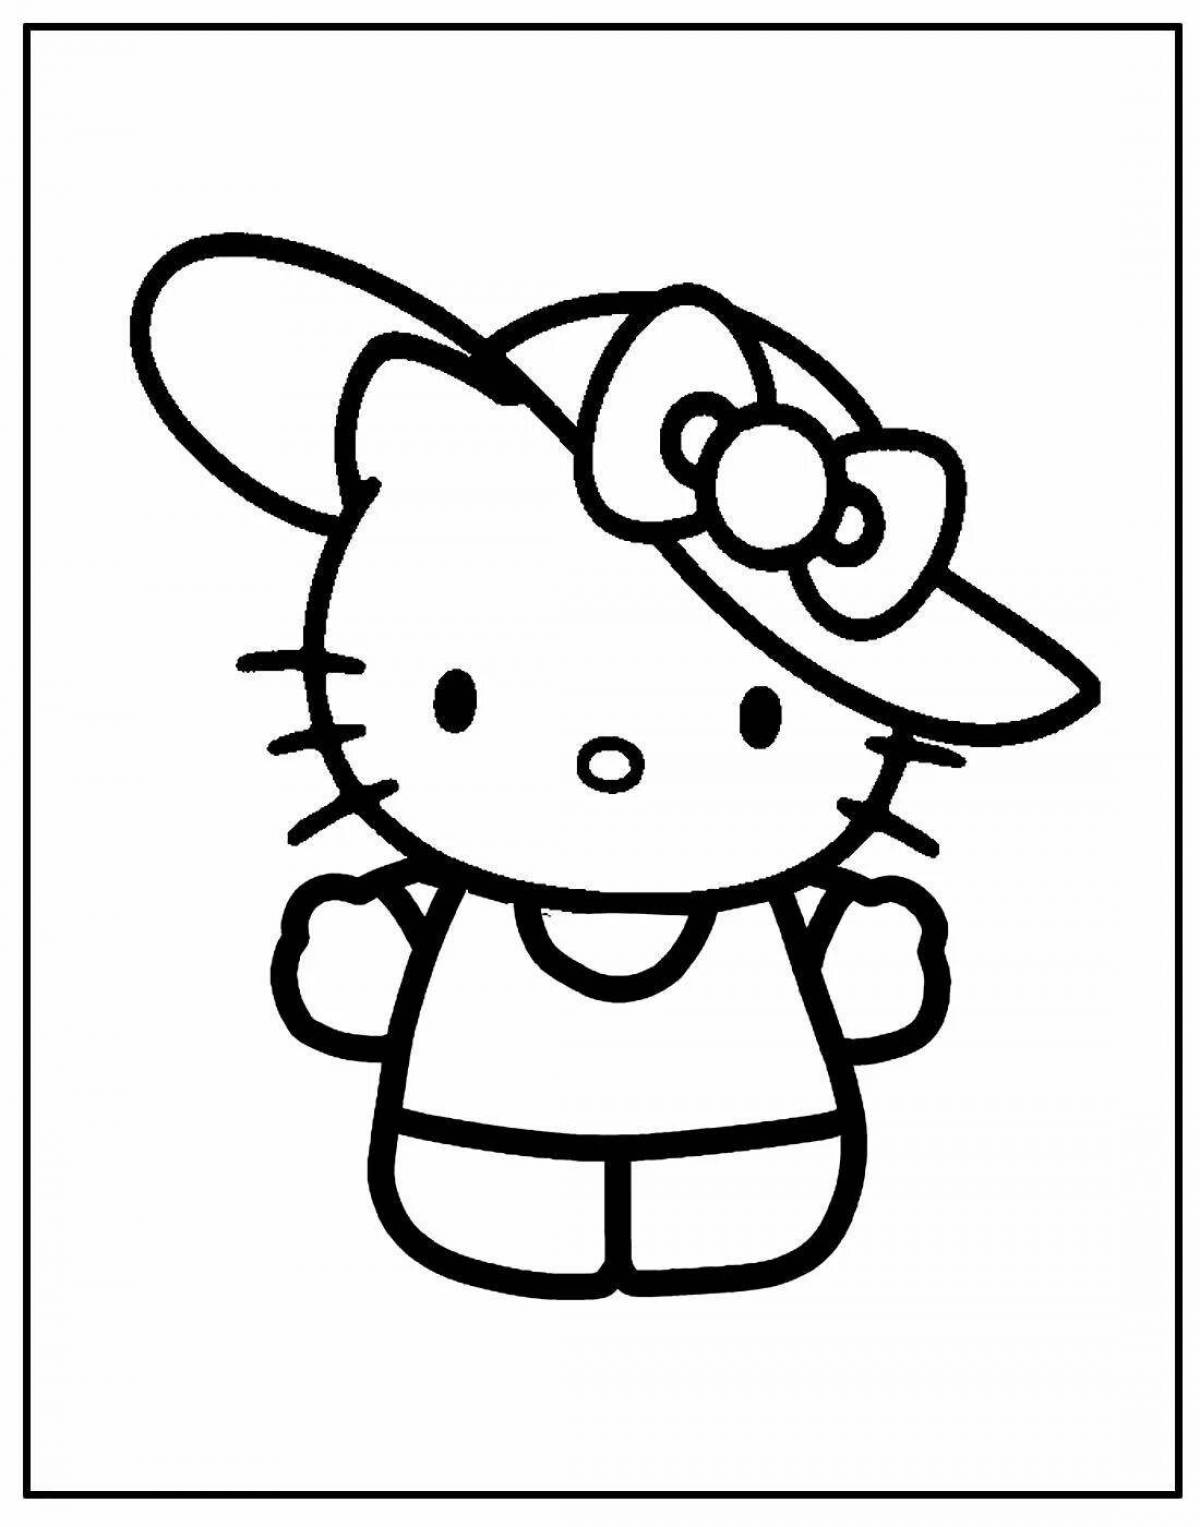 Coloring book with colorful hello kitty characters